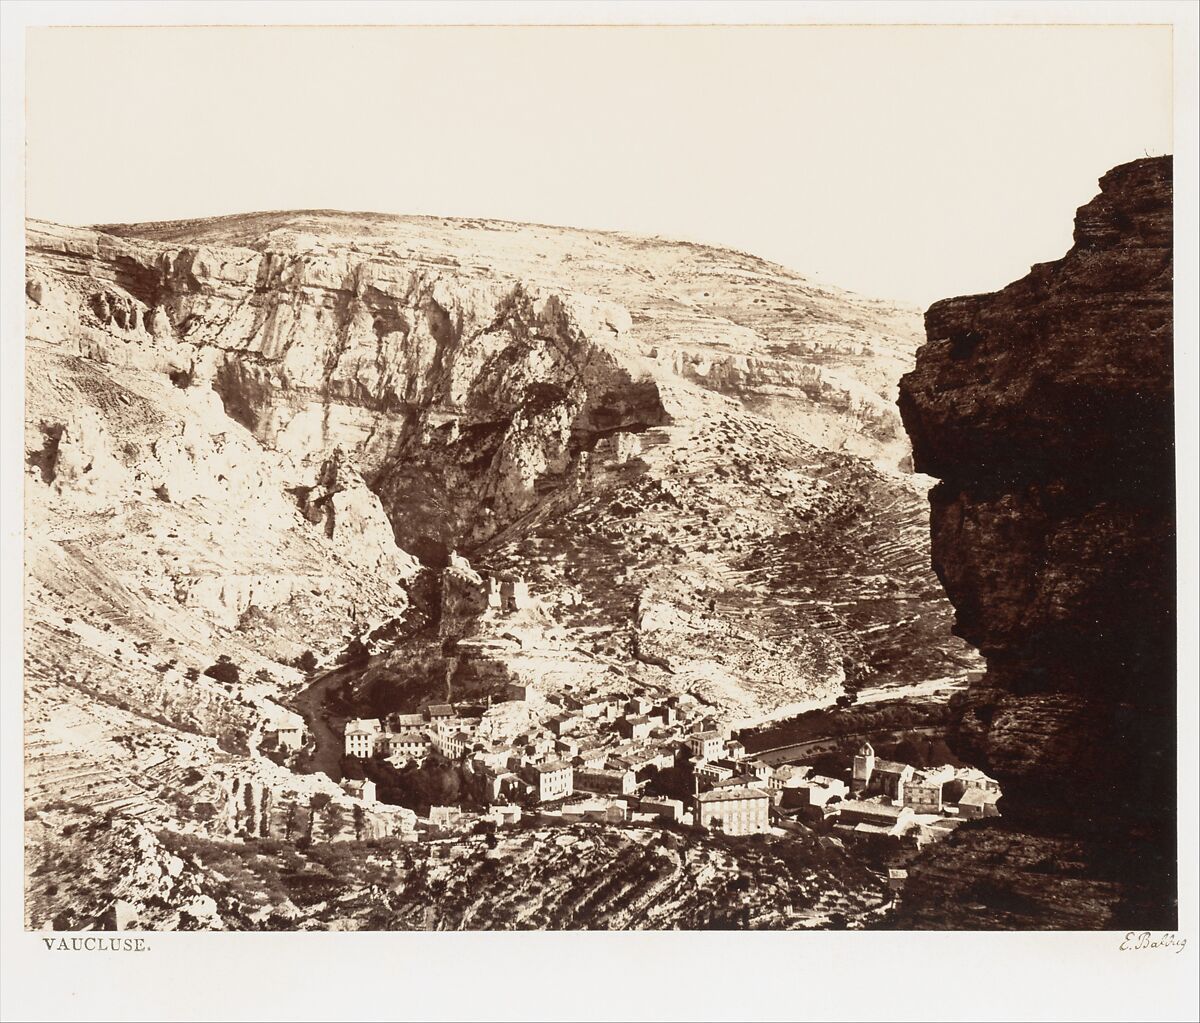 Vaucluse, Edouard Baldus (French (born Prussia), 1813–1889), Albumen silver print from glass negative? 